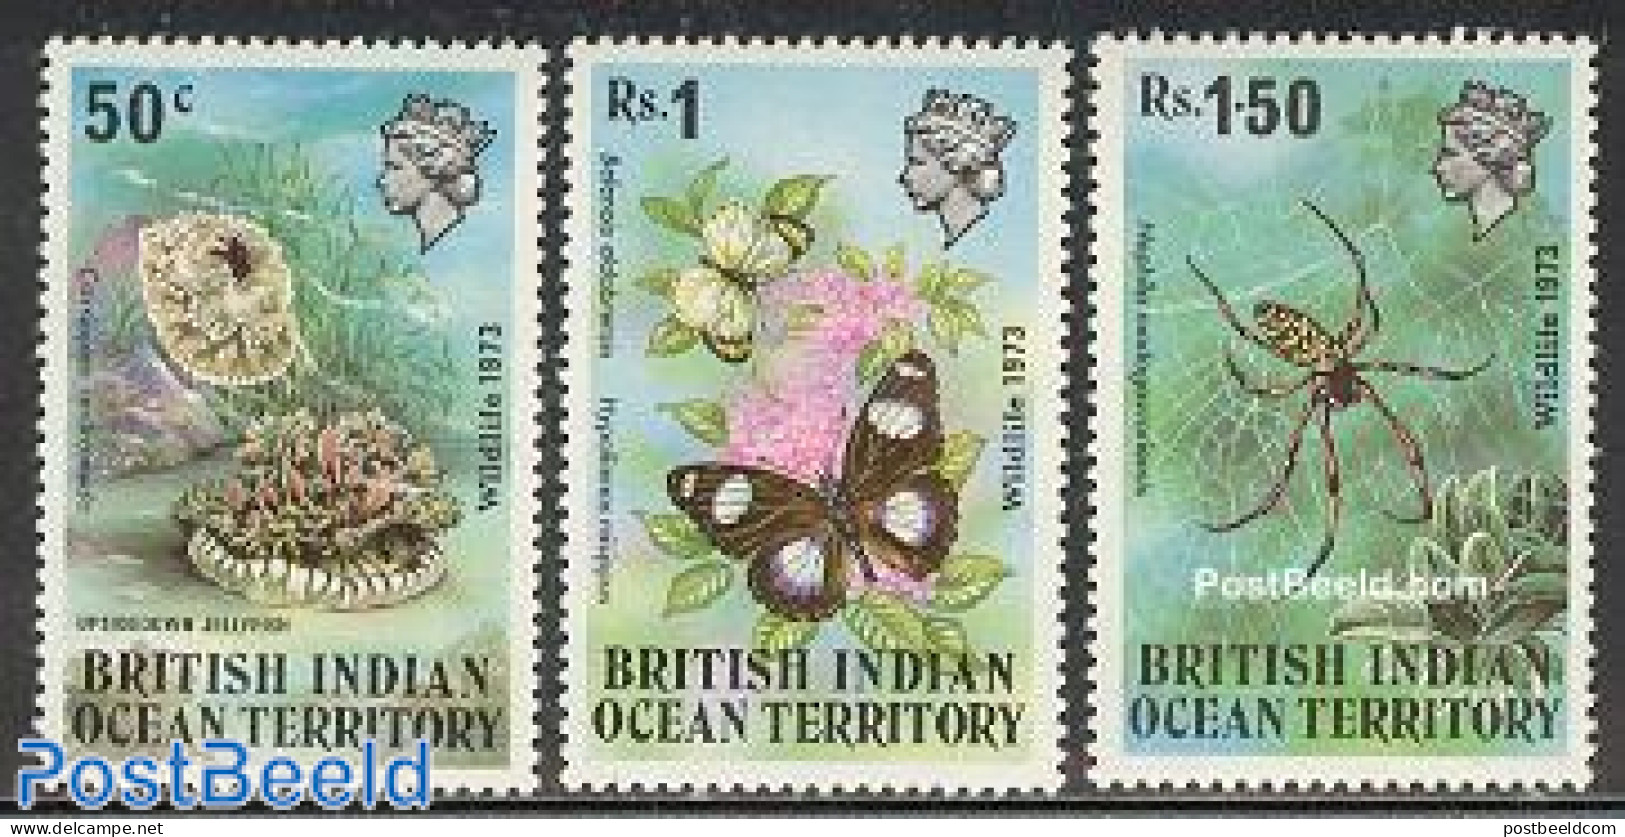 British Indian Ocean 1973 Animals 3v, Mint NH, Nature - Butterflies - Insects - Shells & Crustaceans - Vie Marine